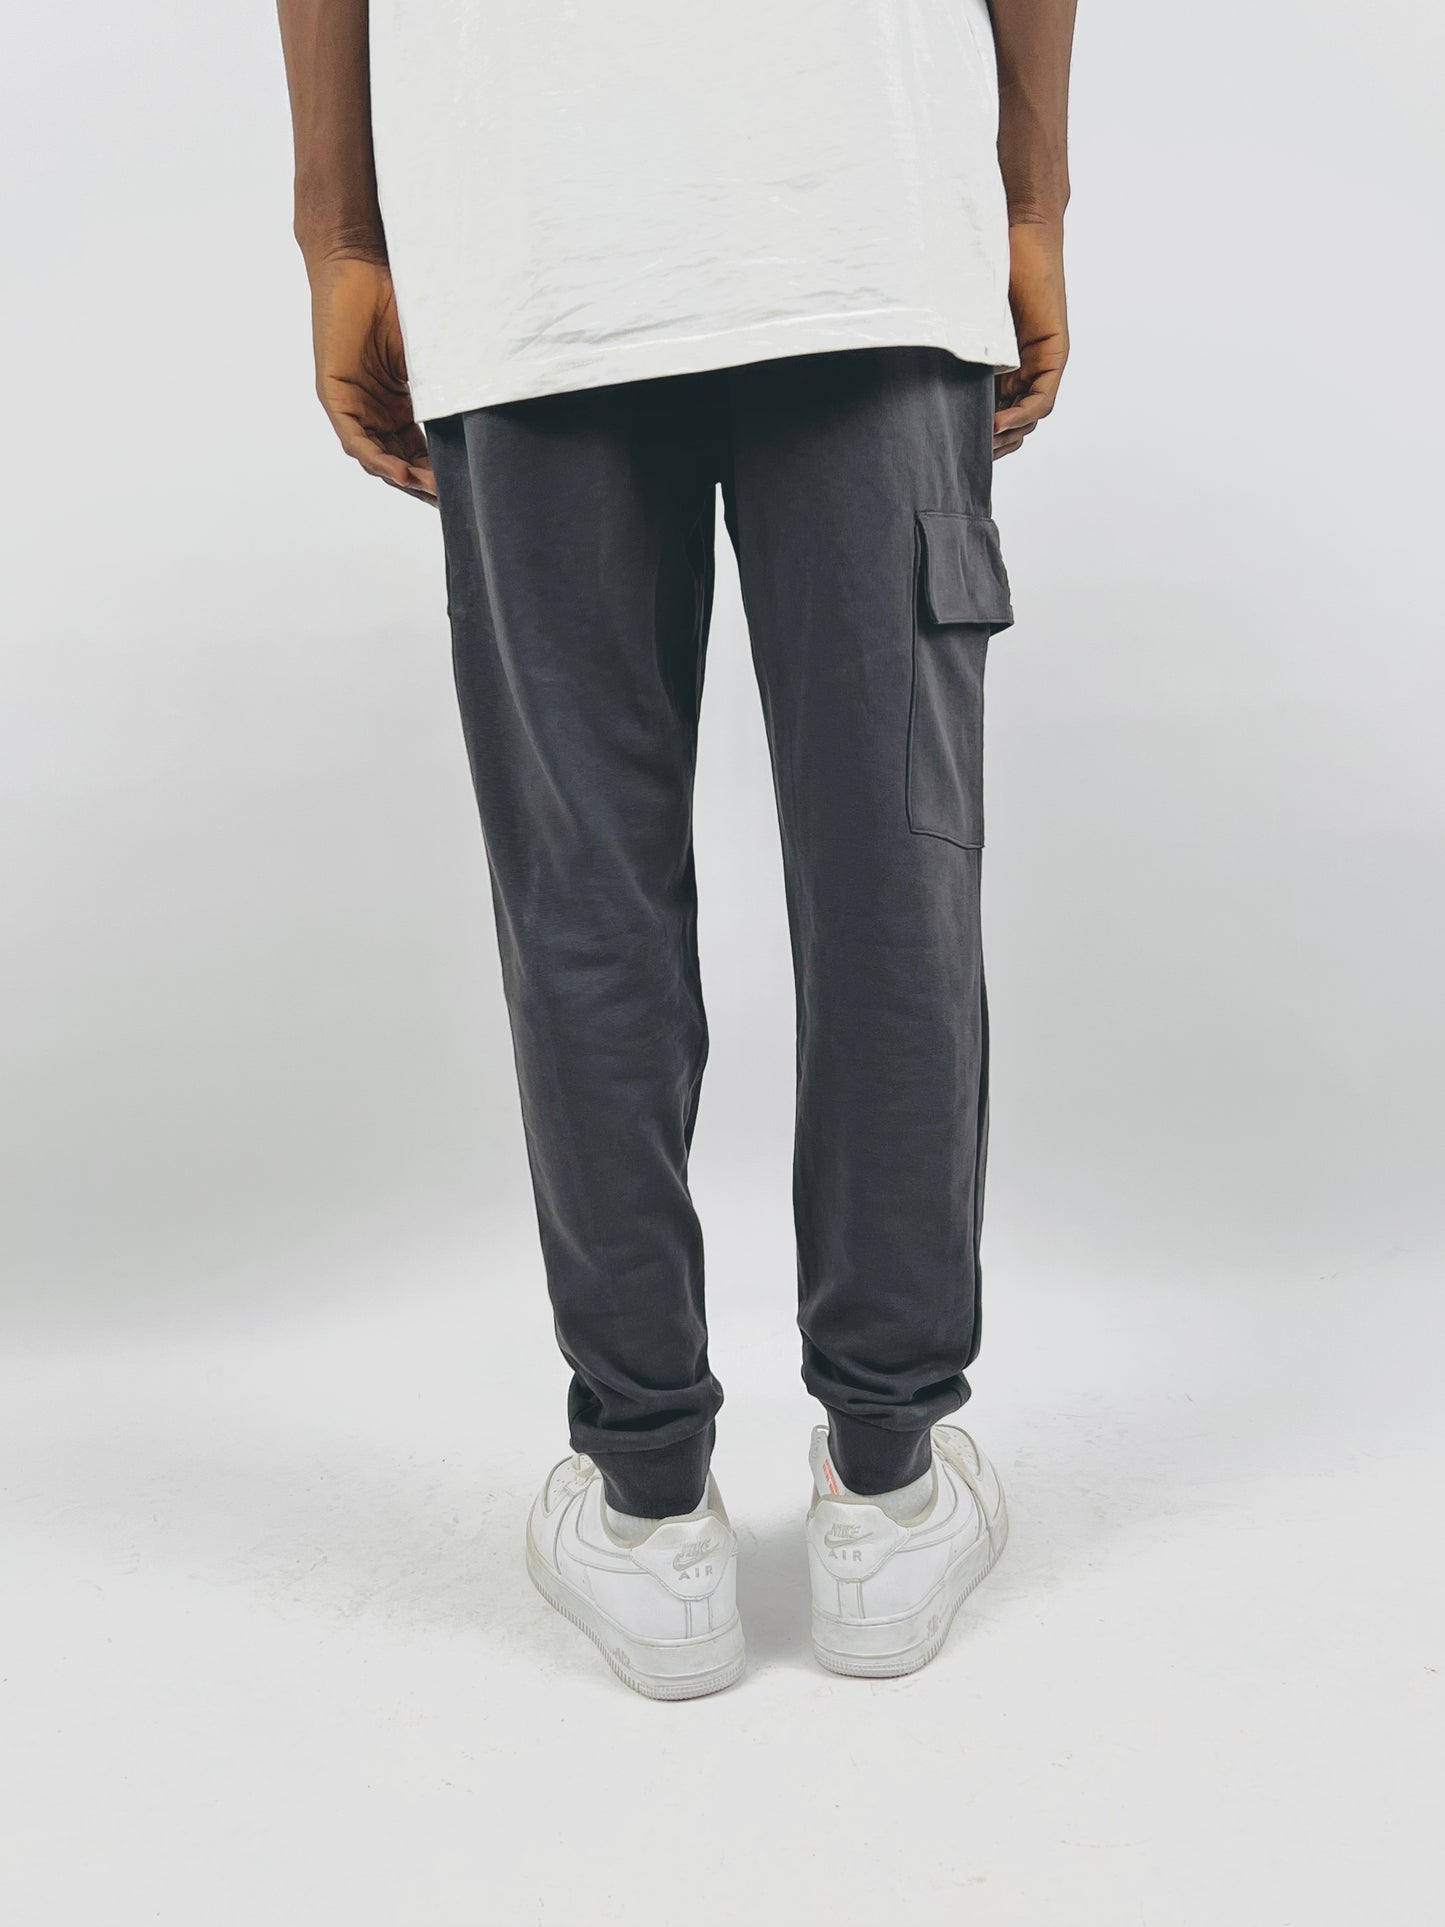 LCW Casual cargo pocket jogger pants in charcoal